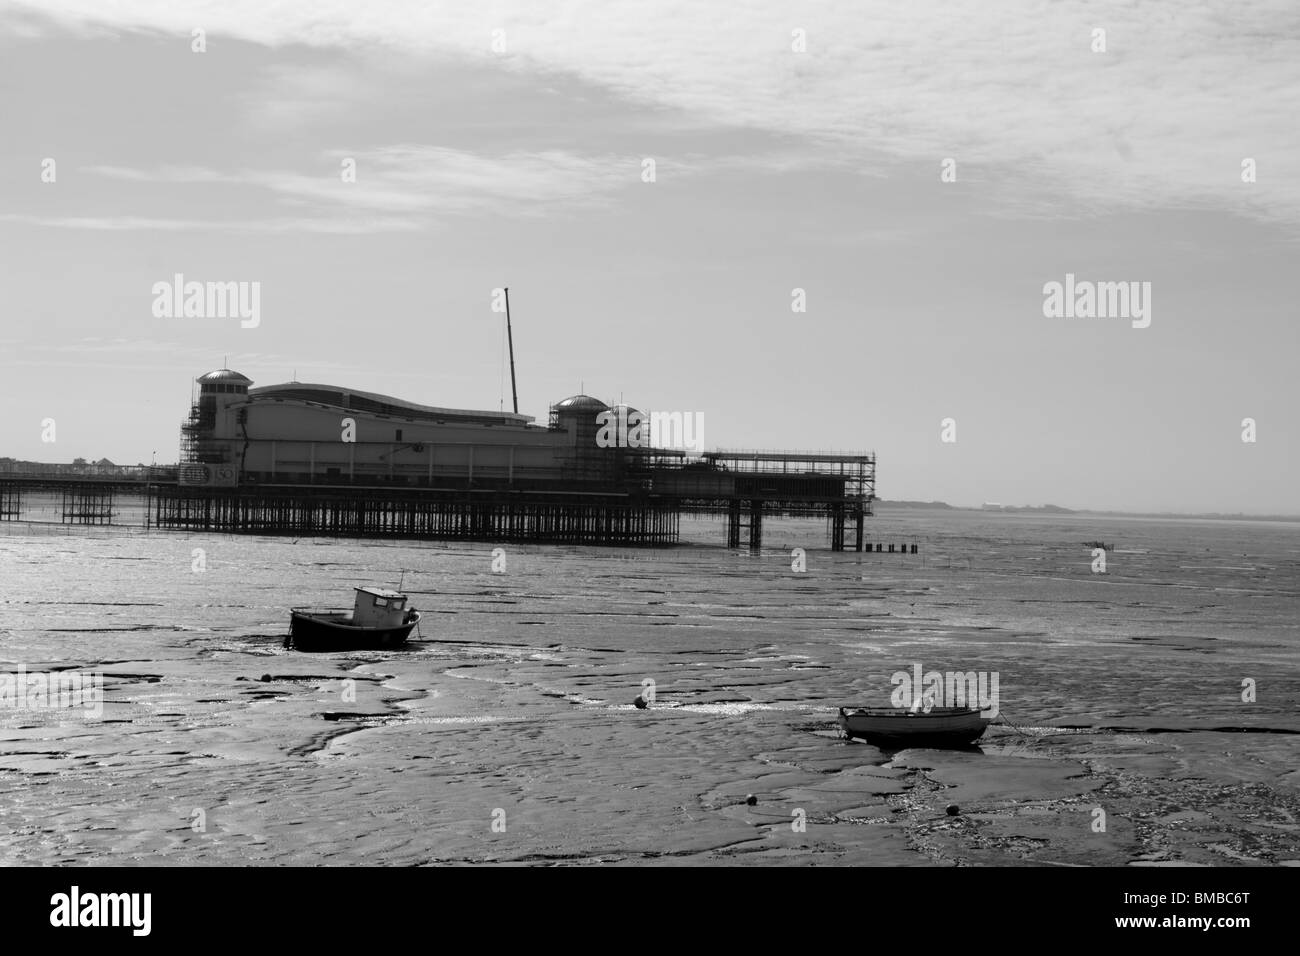 View of the Grand Pier in Knightstone Harbor at low tide, Weston Super-Mare, Somerset, England, UK Stock Photo